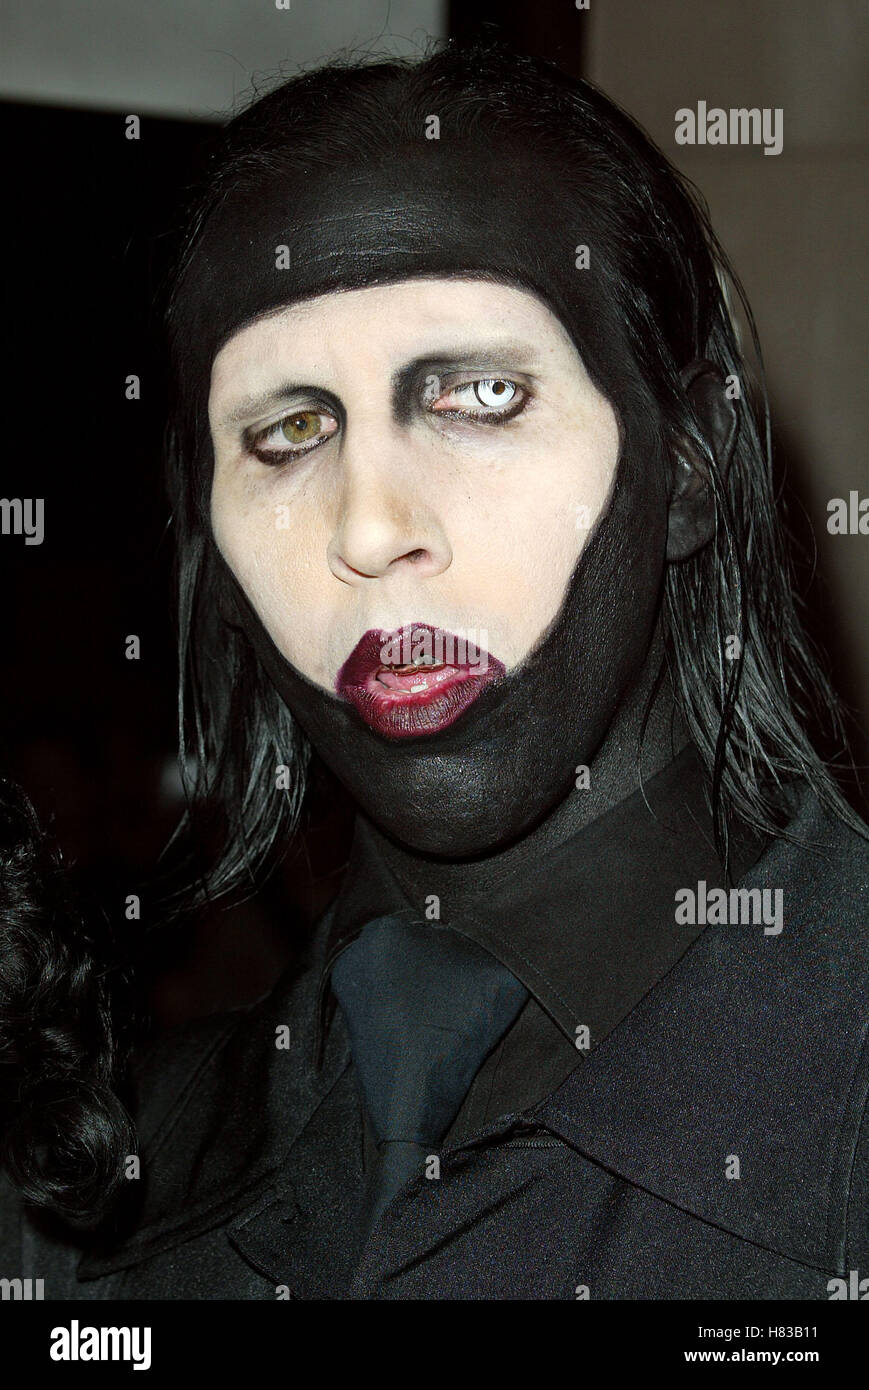 MARILYN MANSON RESIDENT EVIL FILM PREMIERE HOLLYWOOD LOS ANGELES USA 12 March 2002 Stock Photo